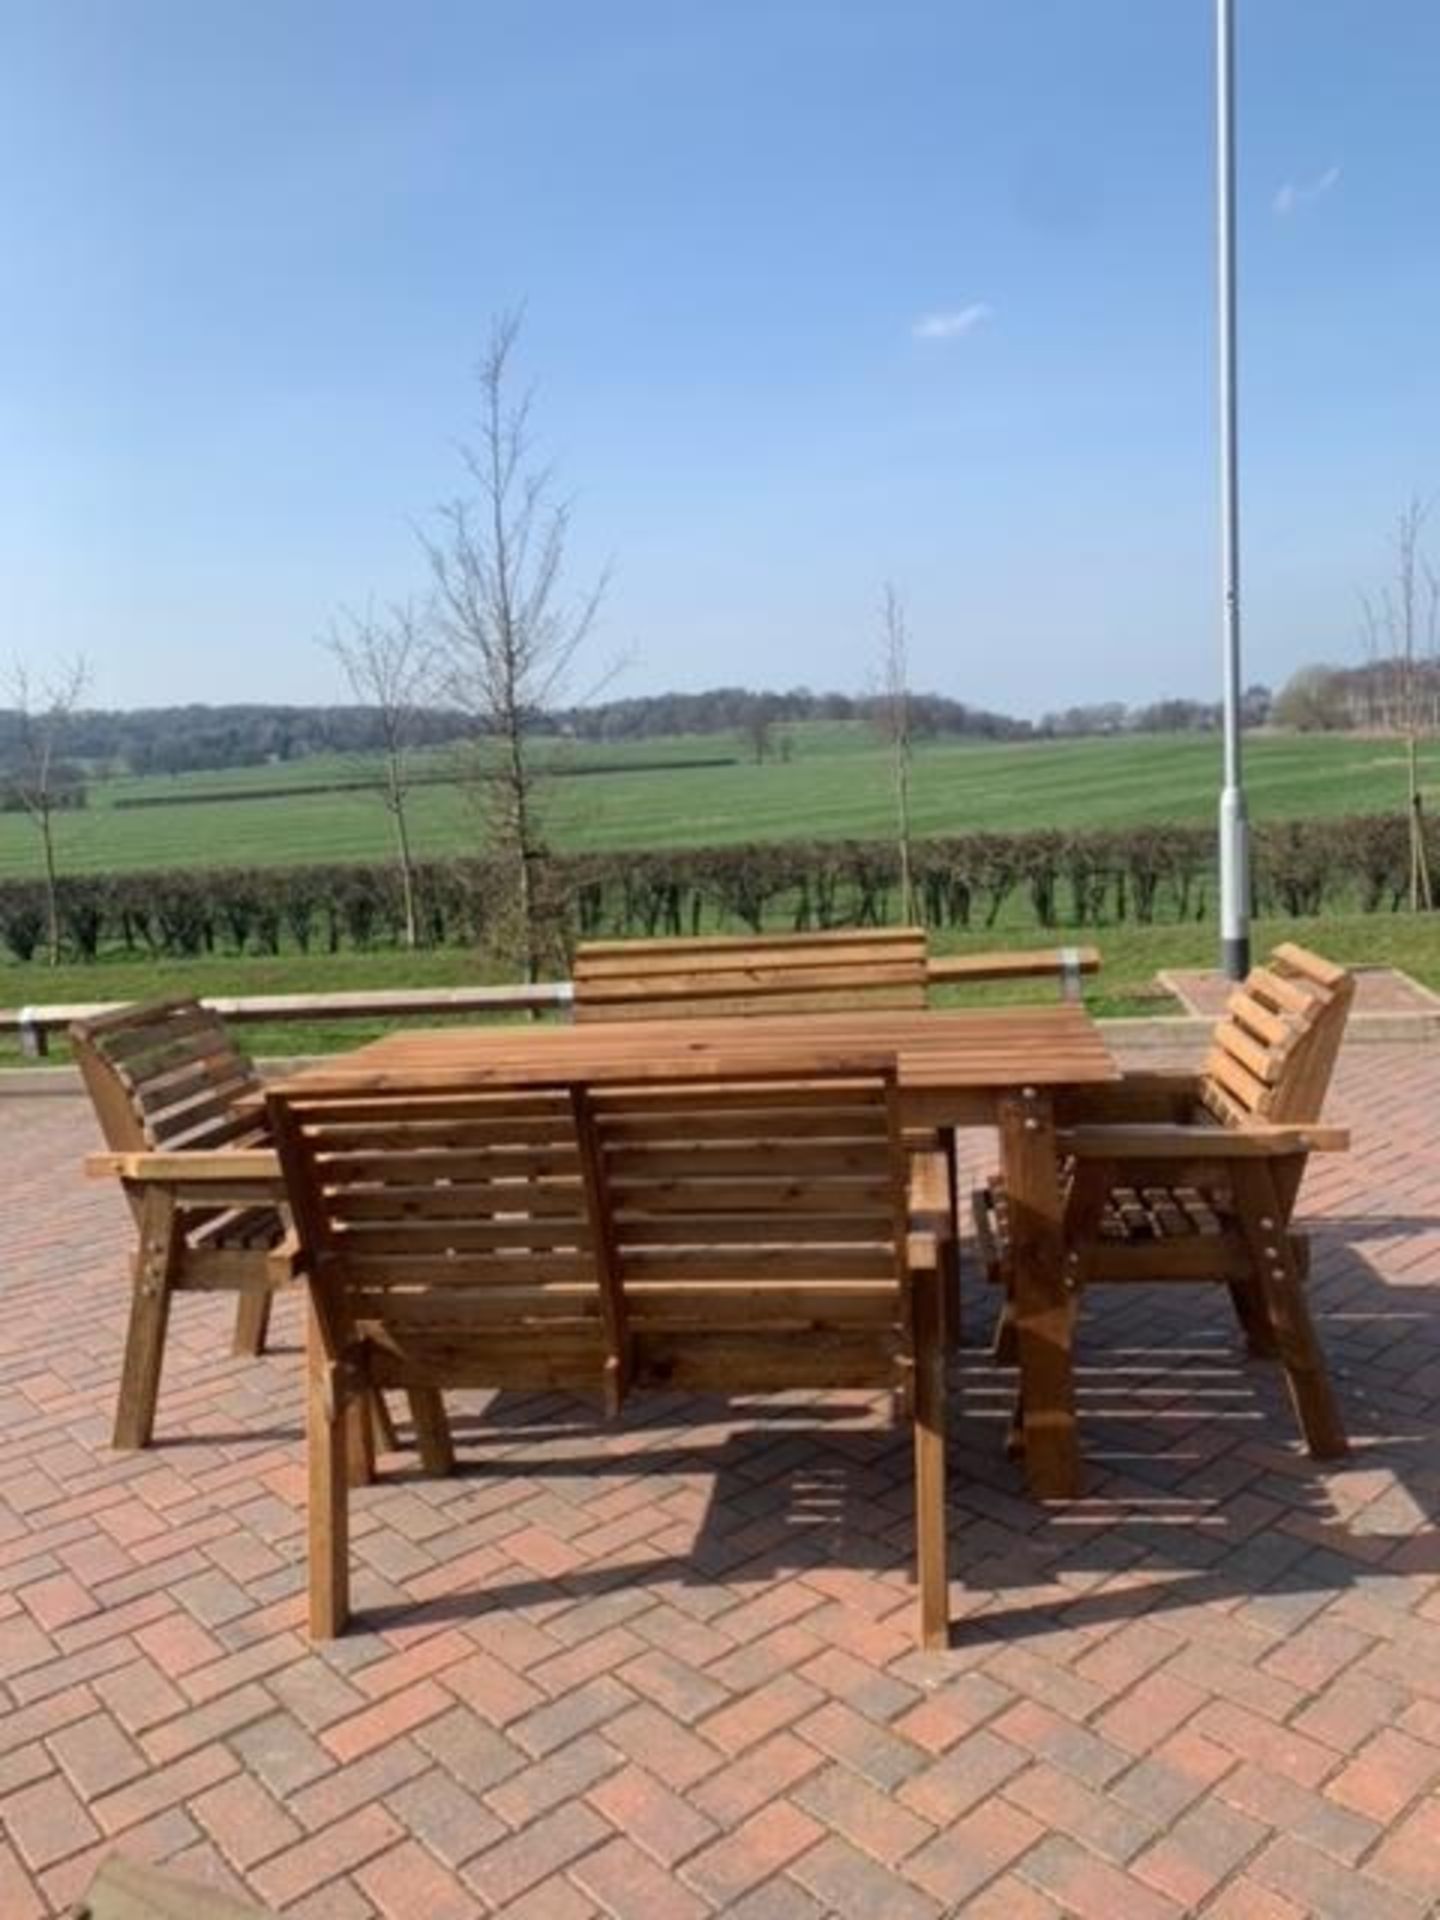 BRAND NEW QUALITY 6 seater handcrafted Garden Furniture set,Large table, 2 benches, 2 chairs*NO VAT* - Image 7 of 7